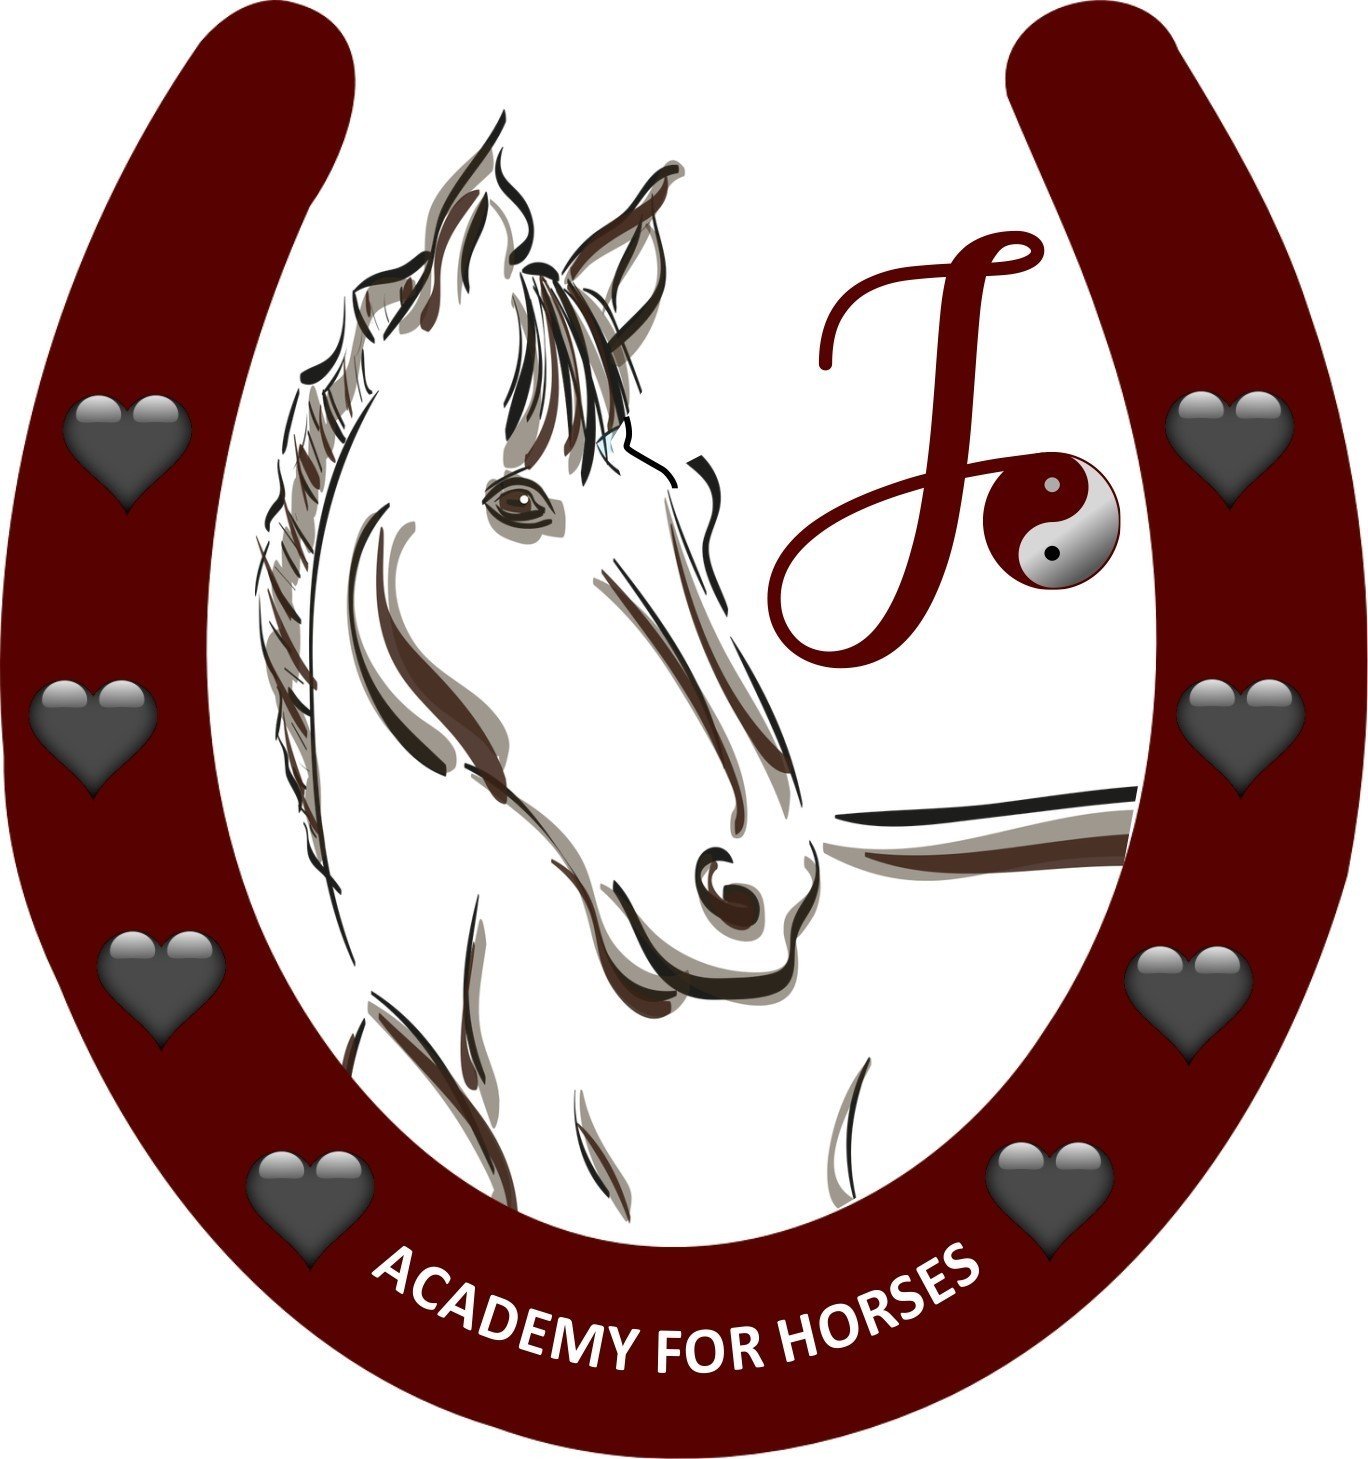 Academy for Horses